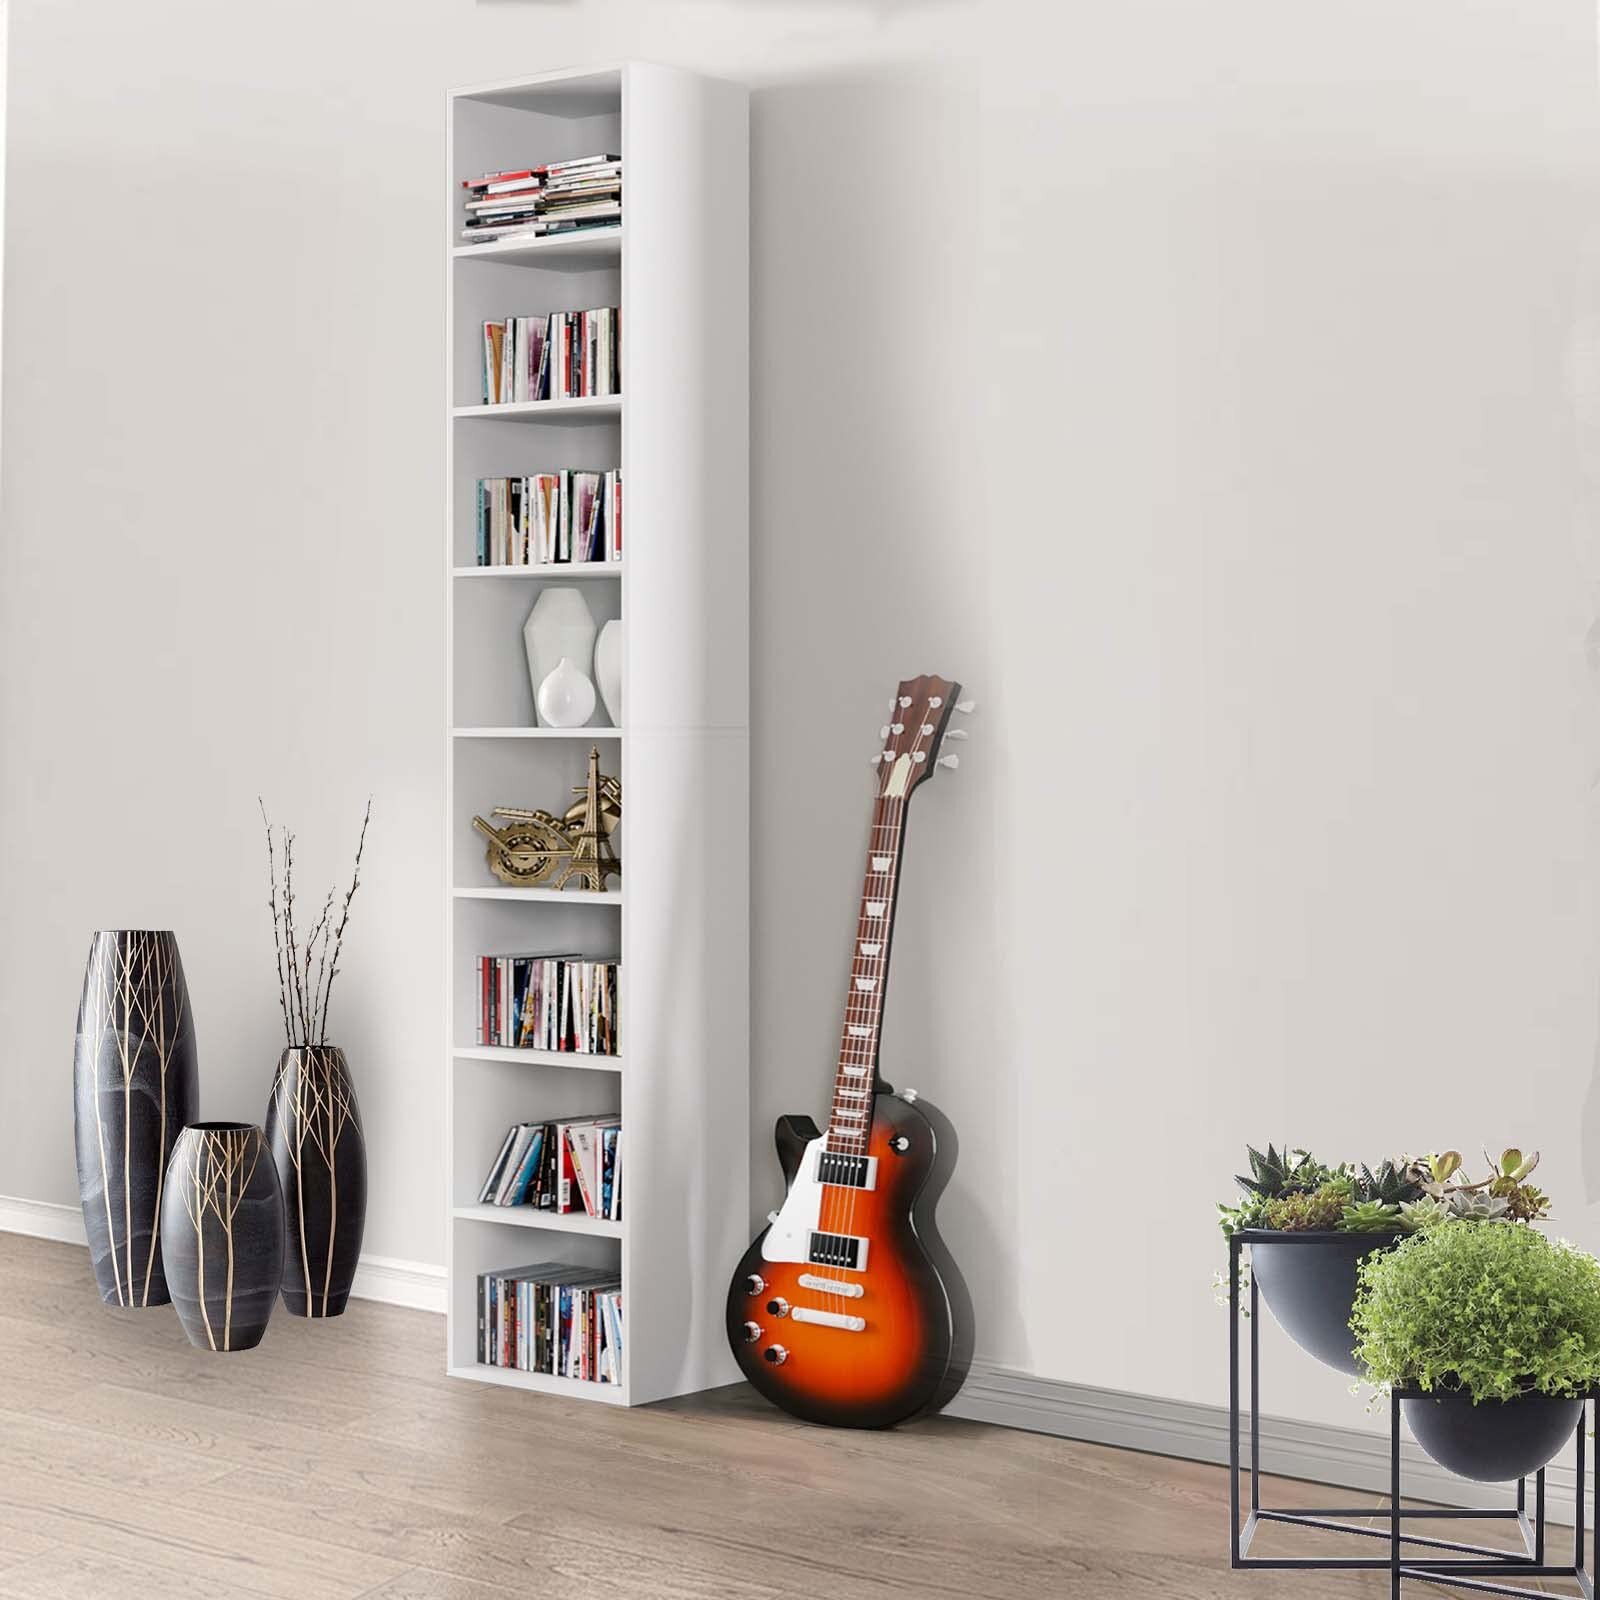 Gracyn 8-Tier Narrow Bookshelf with Adjustable Shelves Millwood Pines Color: White